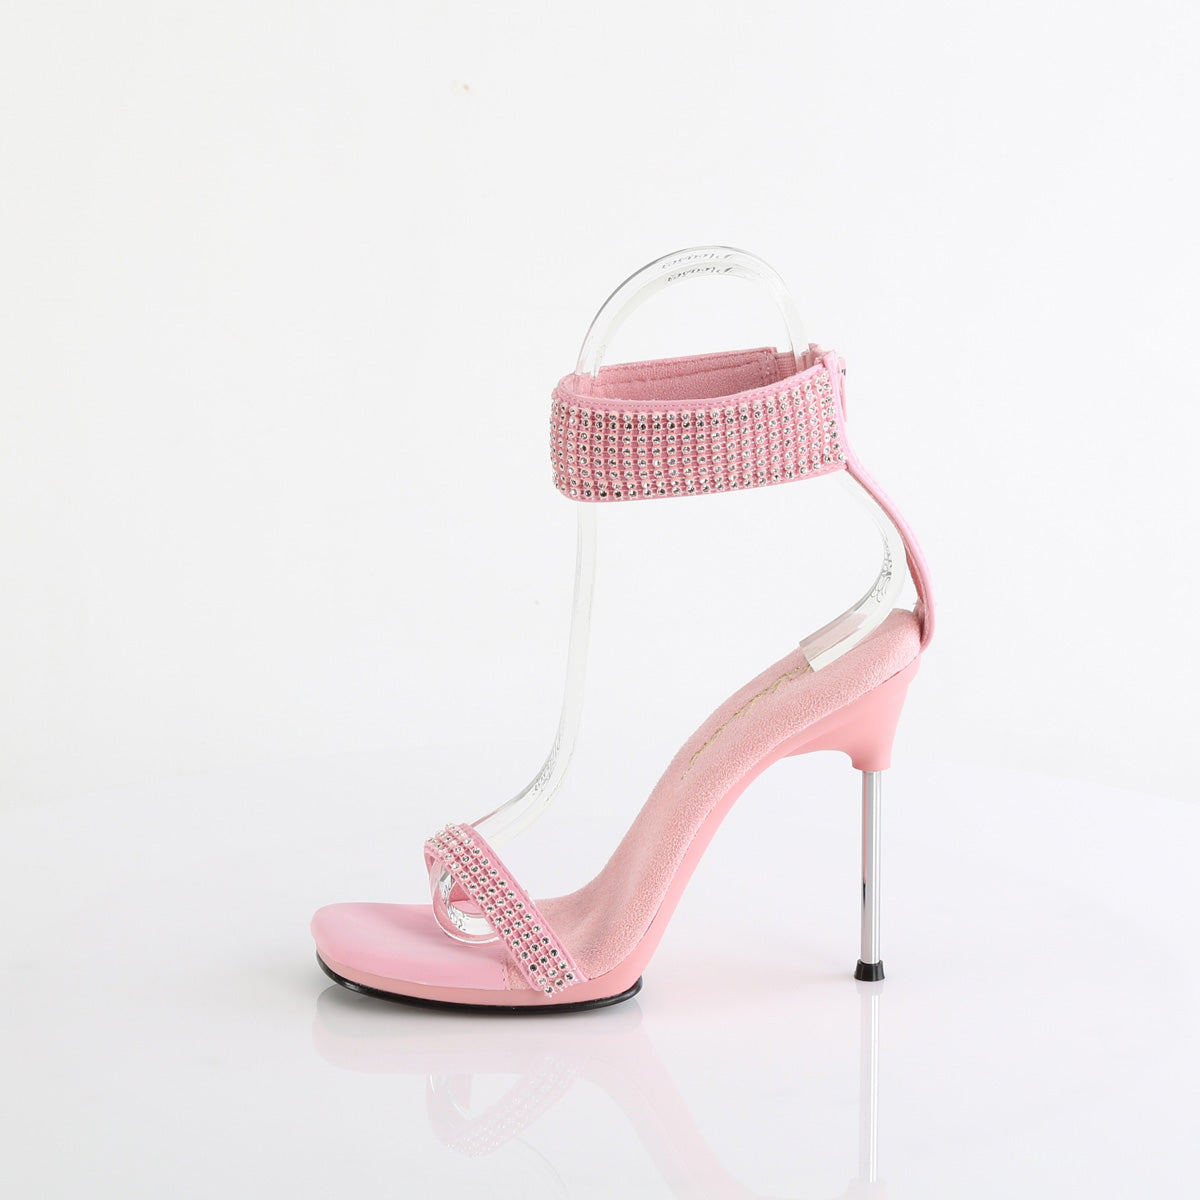 CHIC-40 Fabulicious B Pink Faux Leather-Rhinestones/B Pink Shoes [Sexy Shoes]